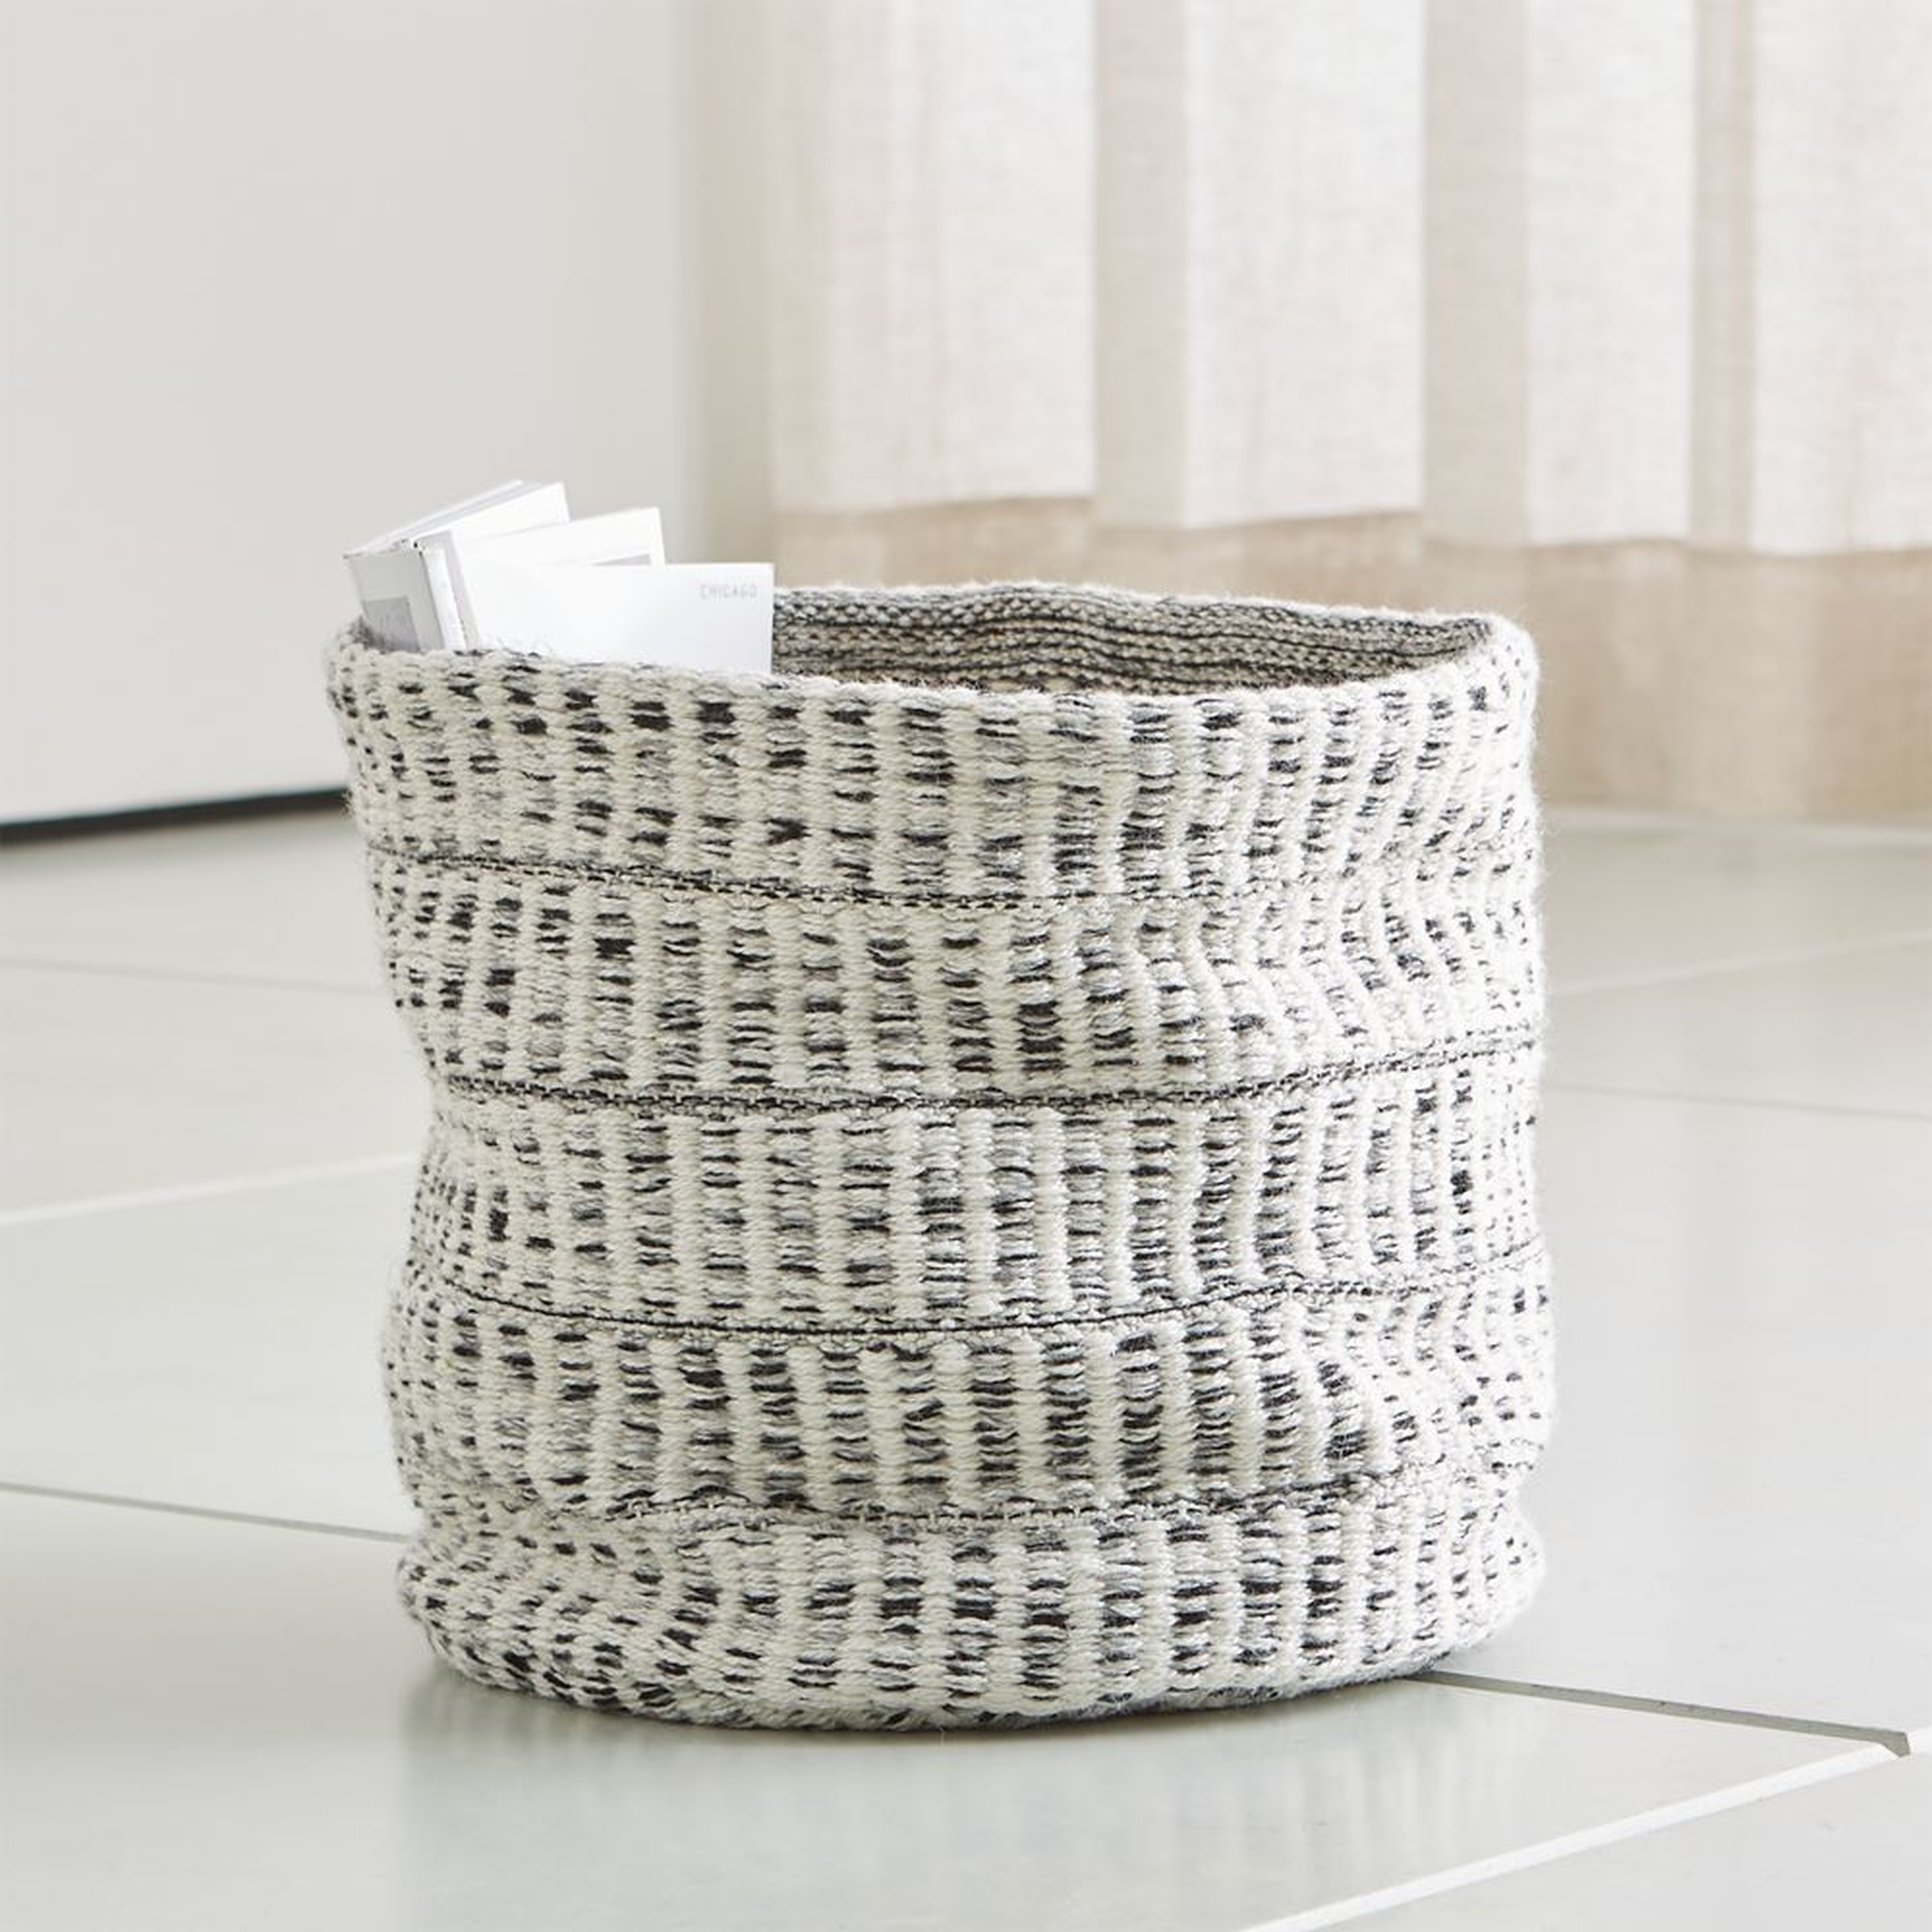 Mohave Medium Heather Embroidered Basket - Crate and Barrel